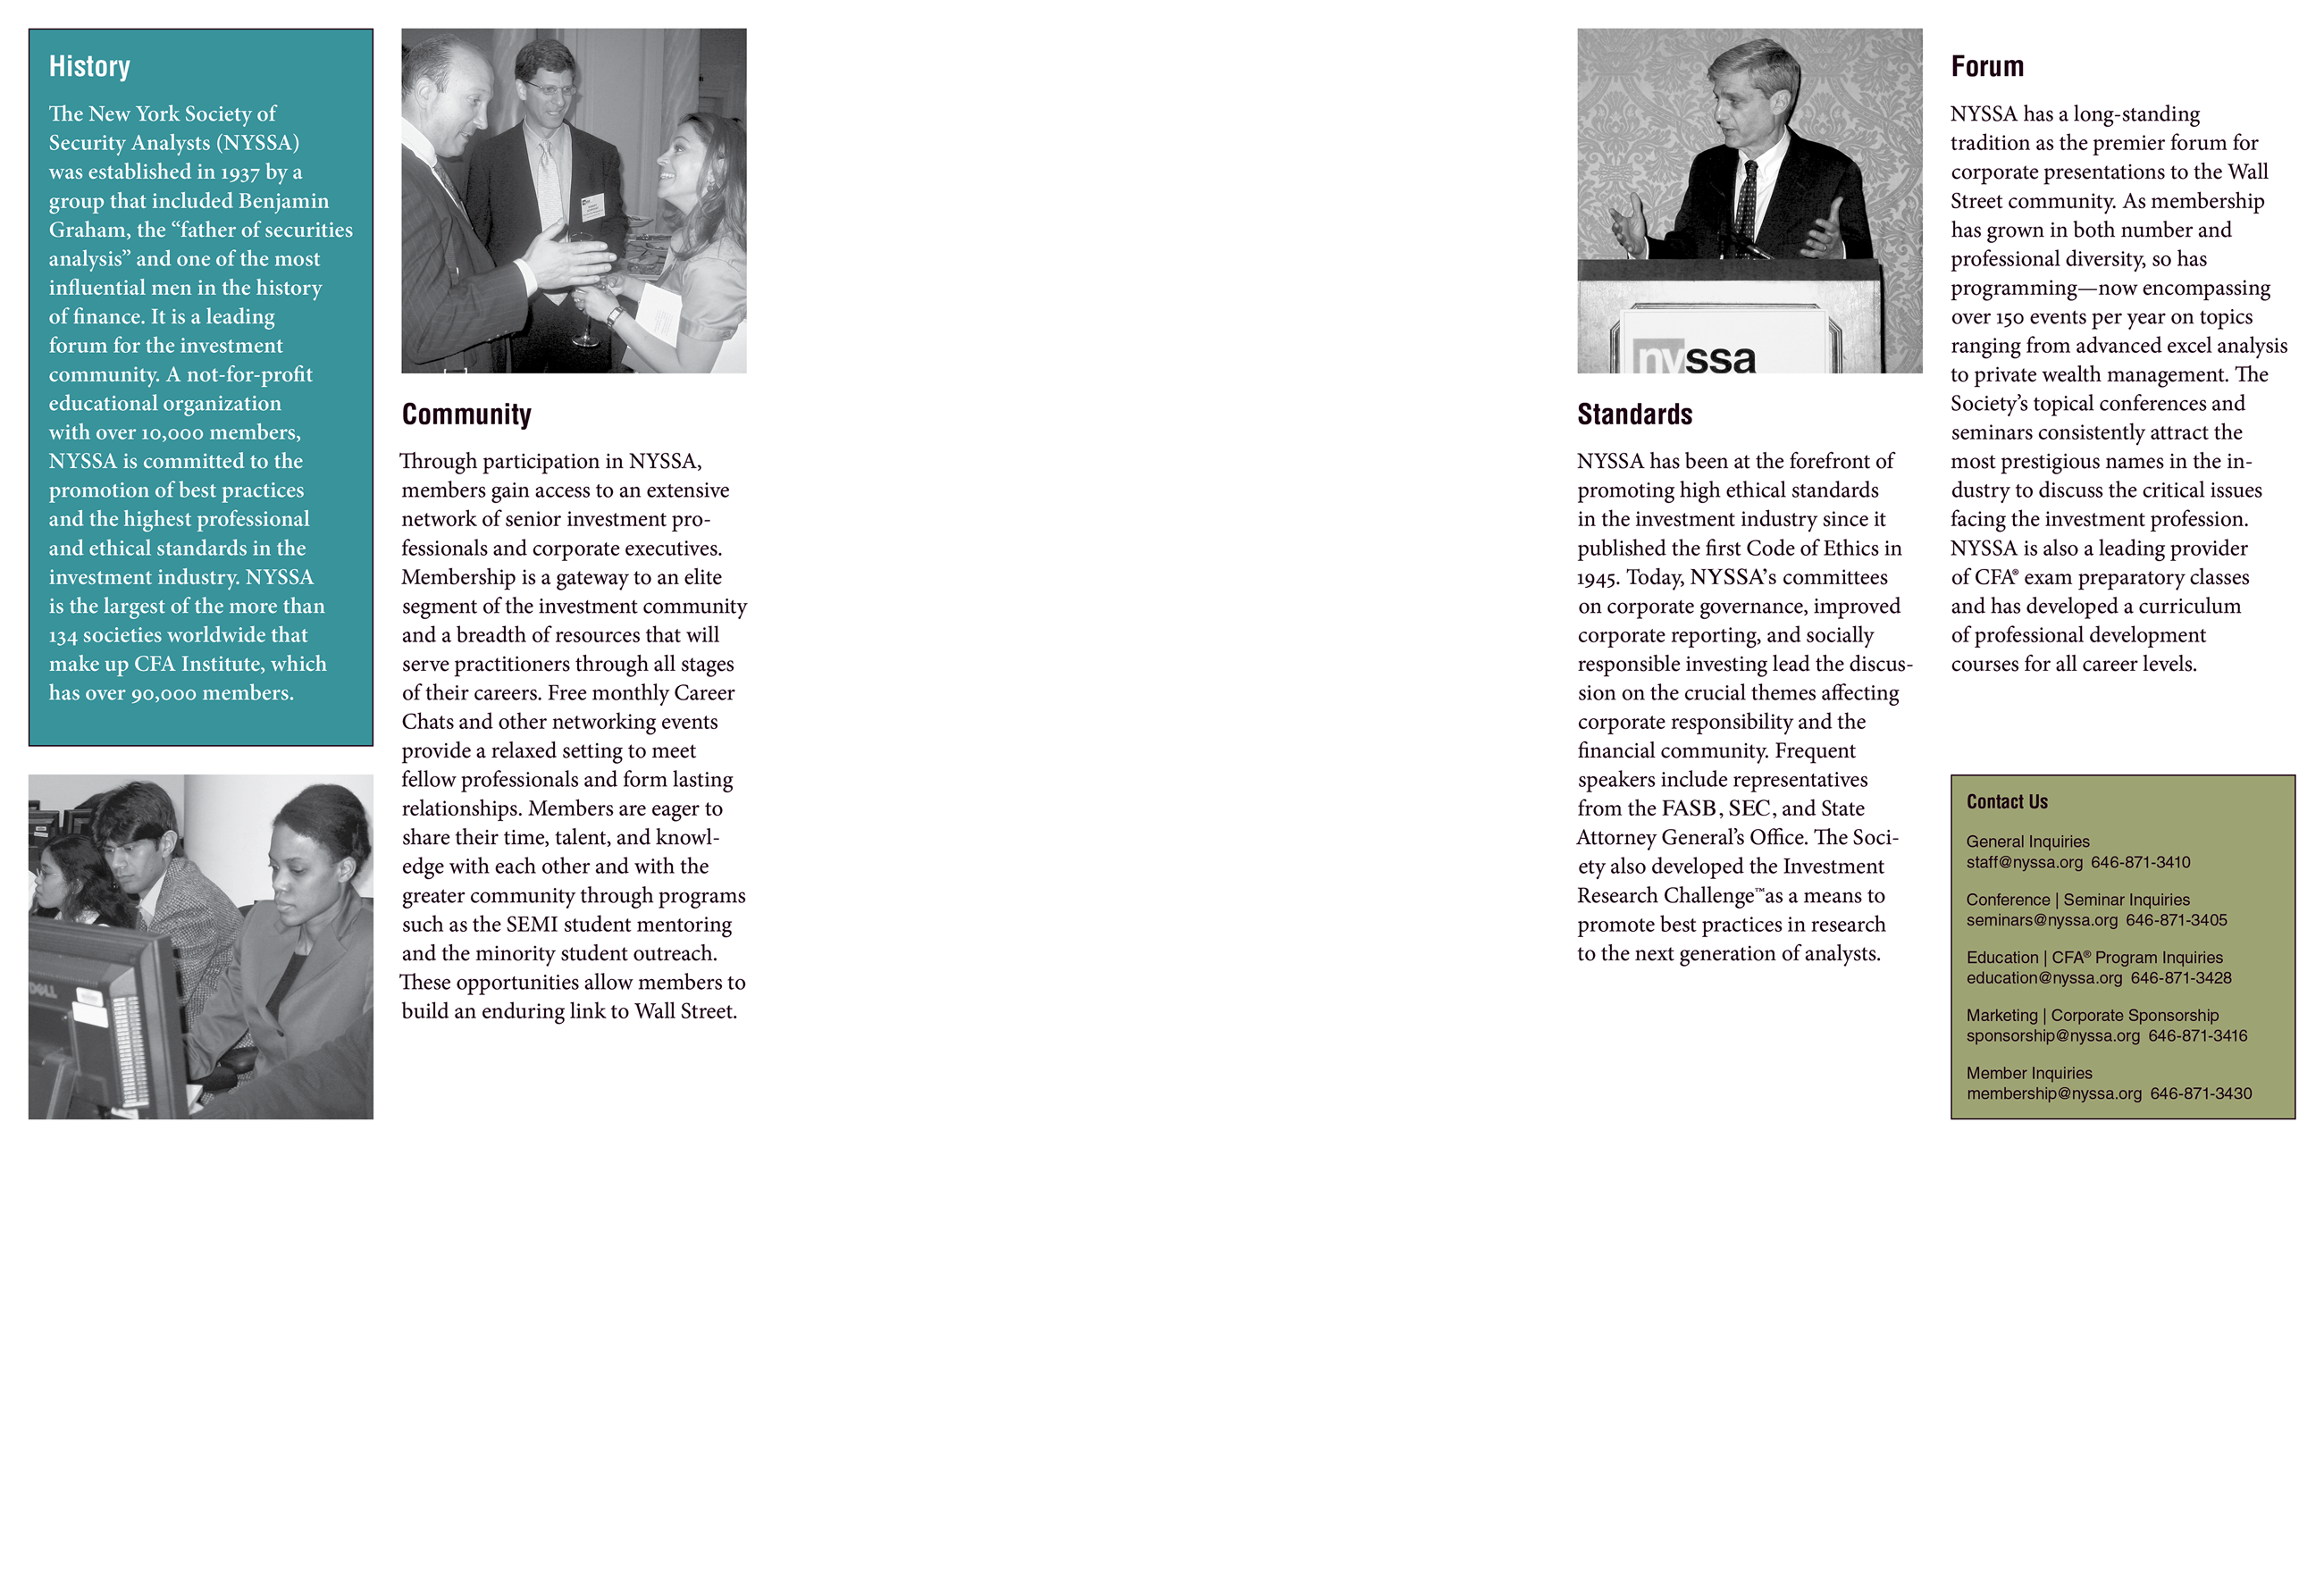 Inside cover of trifold brochure for the New York Society of Security Analysts, unfolded, showing photos and text that go with the three themes of community, standards, and forum. Includes photo of Robert Rubin, former U.S. secretary of the treasury.